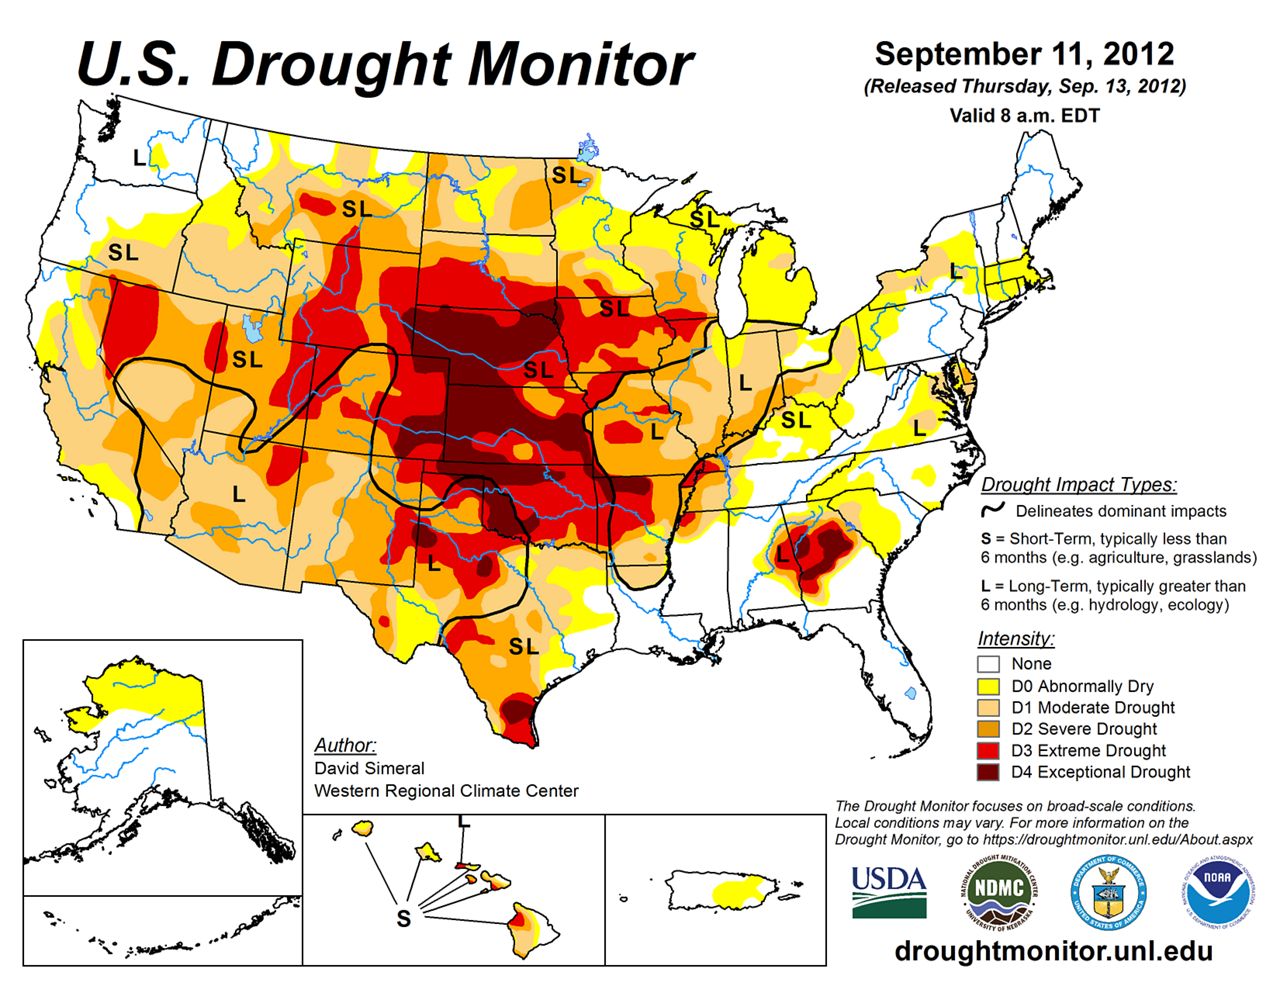 U.S. Drought Monitor in Sept. 2012, showing most of the central Great Plains under an extreme to exceptional drought.